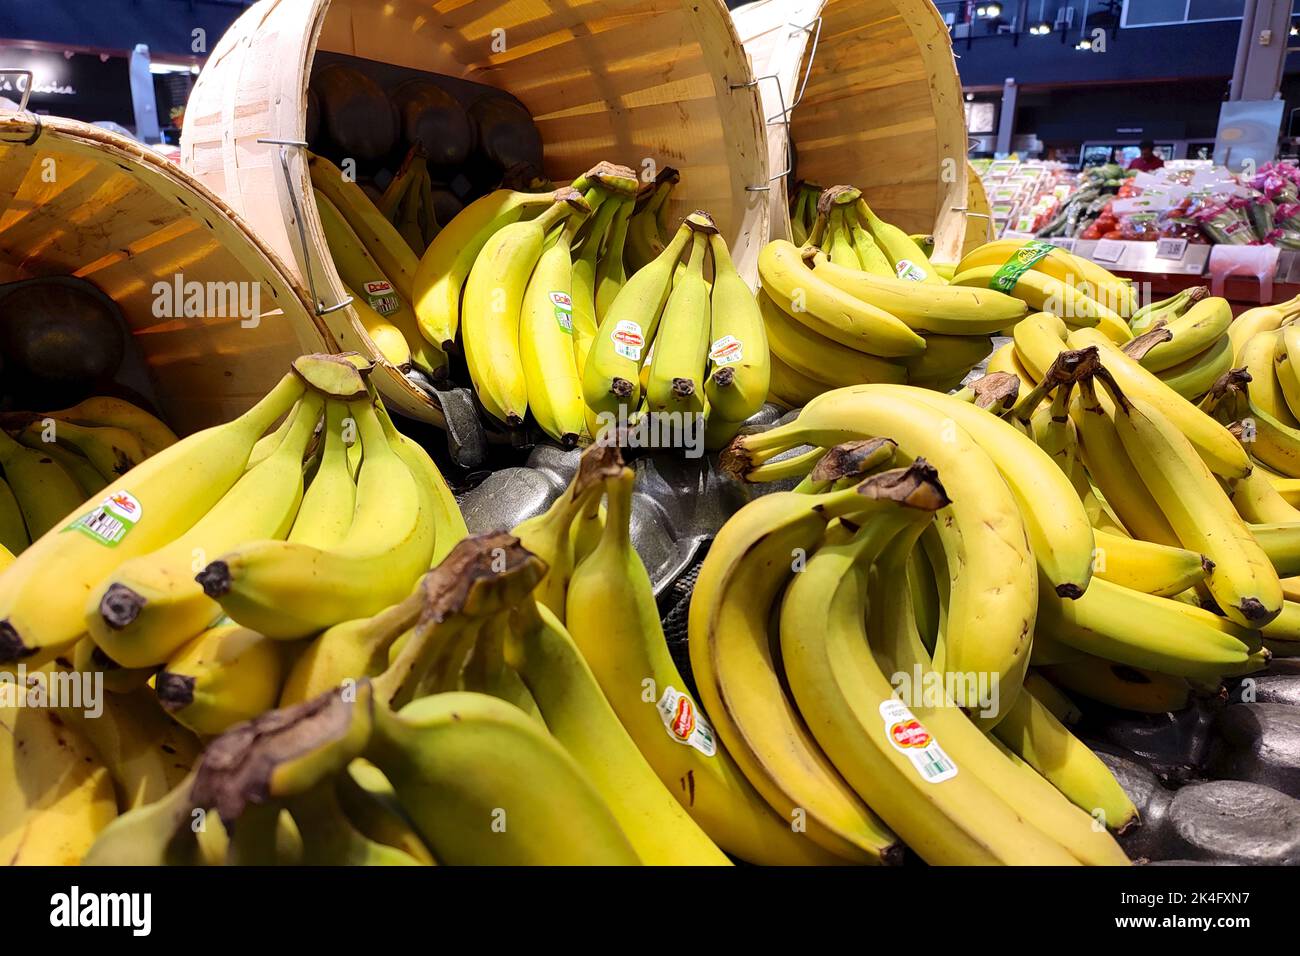 Banana in the basket for sale in the supermarket Stock Photo